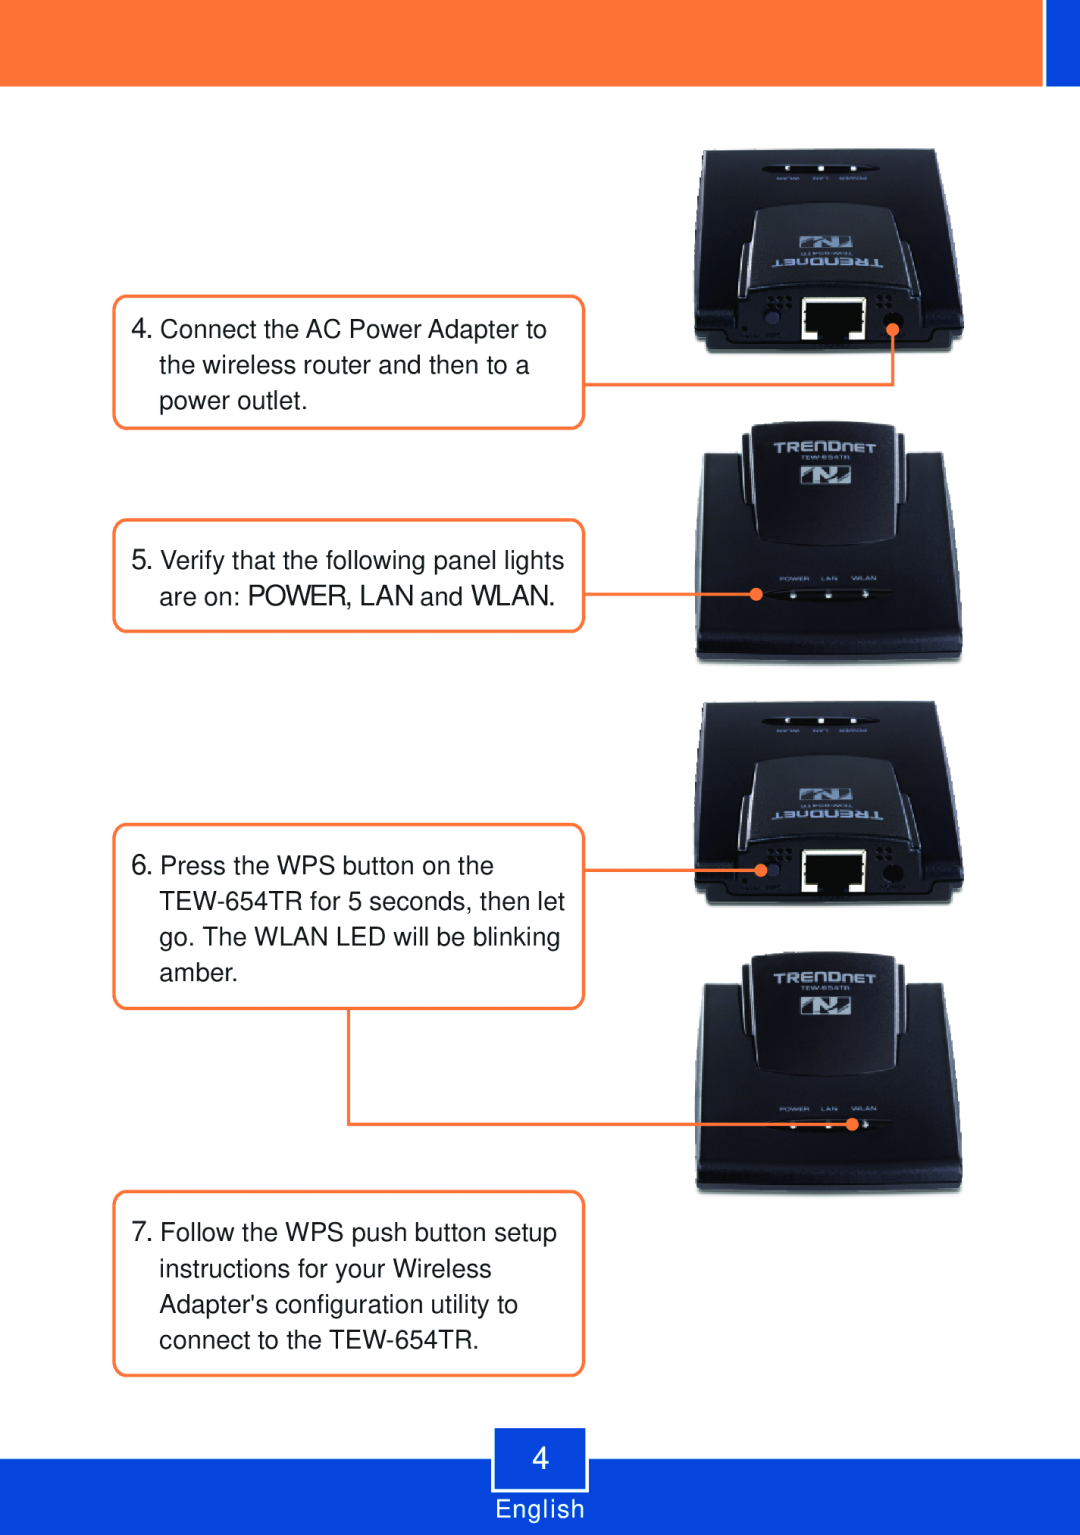 TRENDnet TEW-654TR manual Verify that the following panel lights are on POWER, LAN and WLAN 